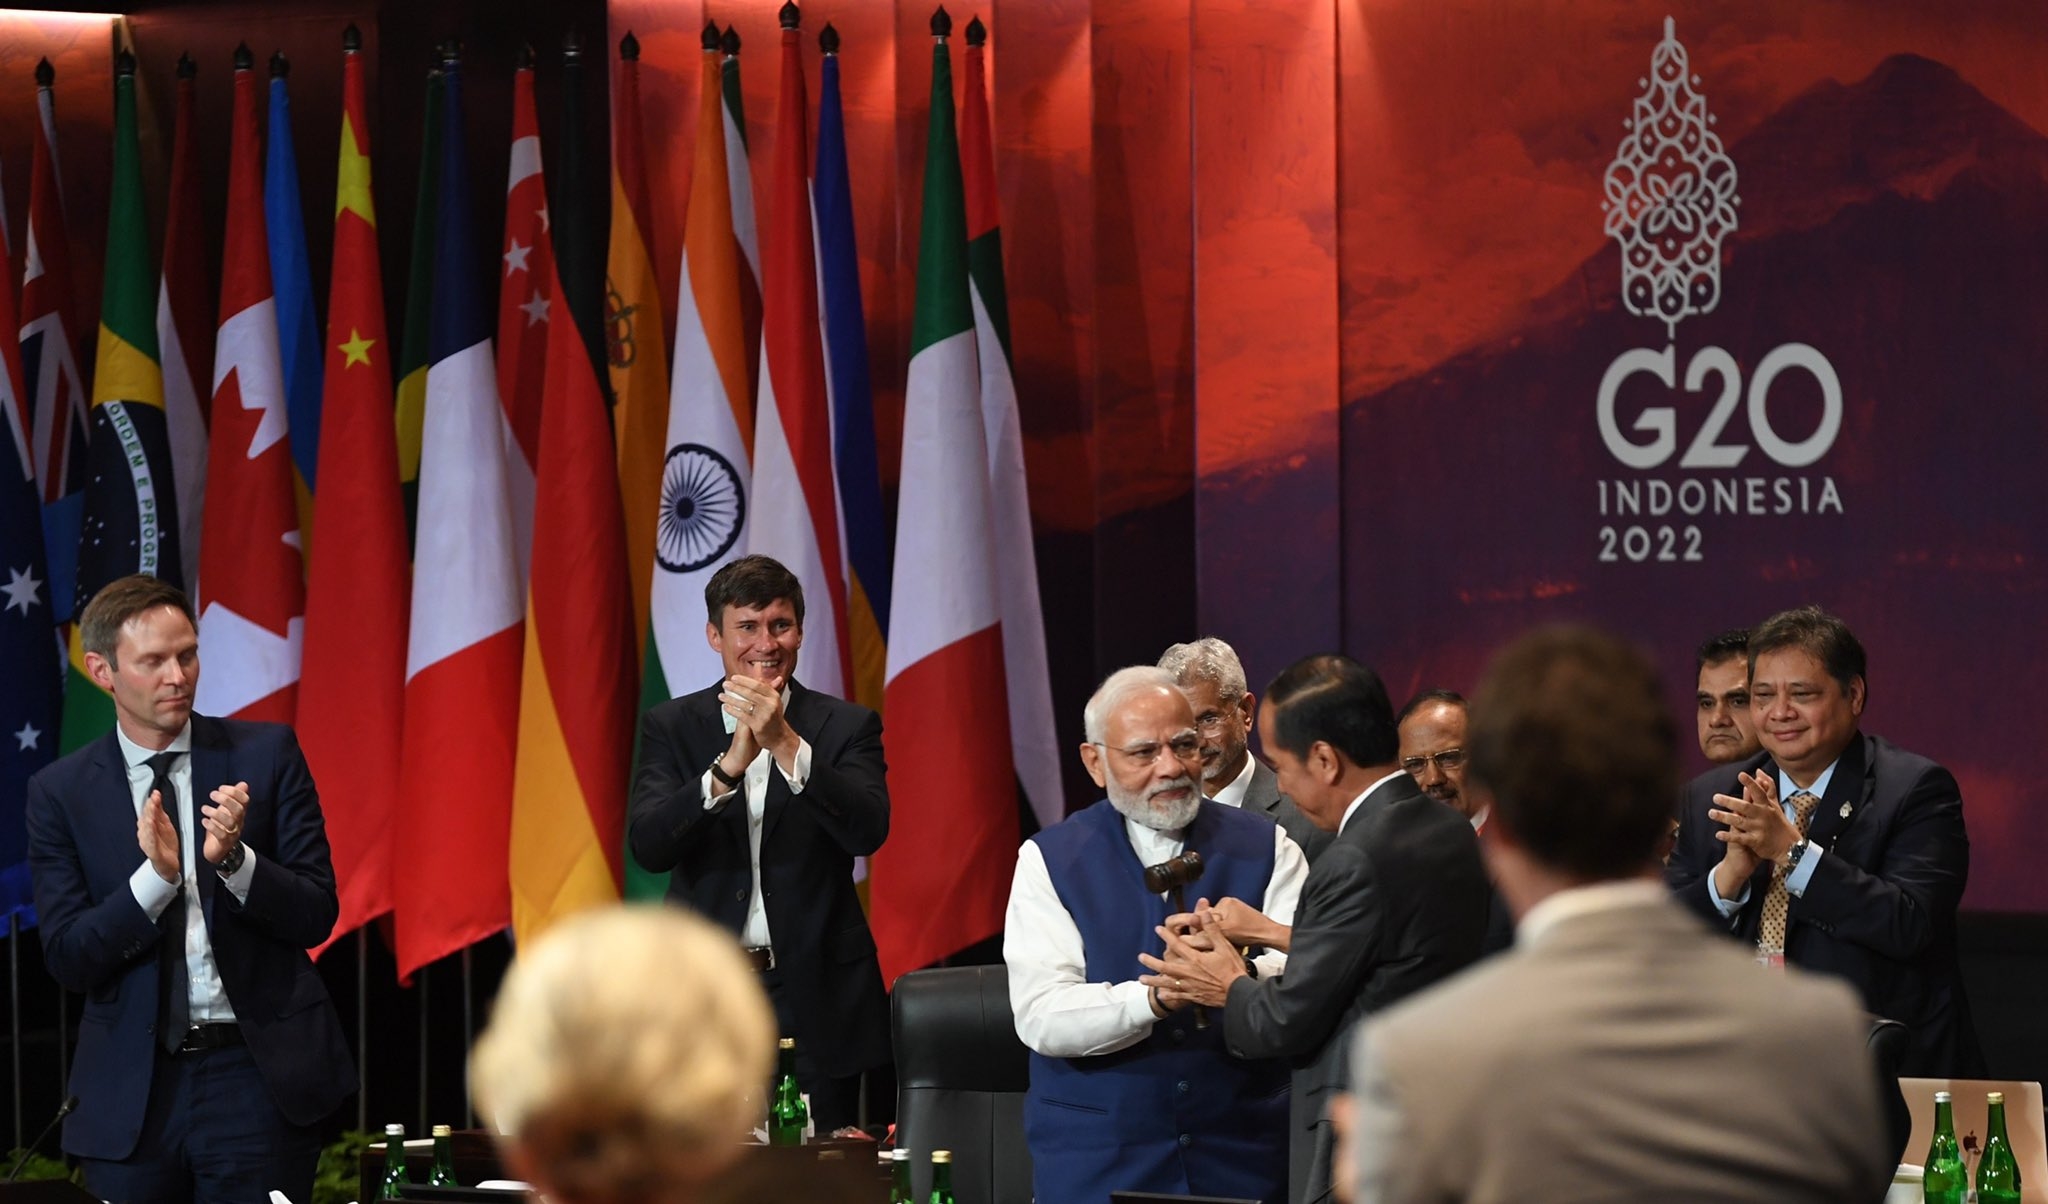 India handed over G20 presidency for next year in Bali